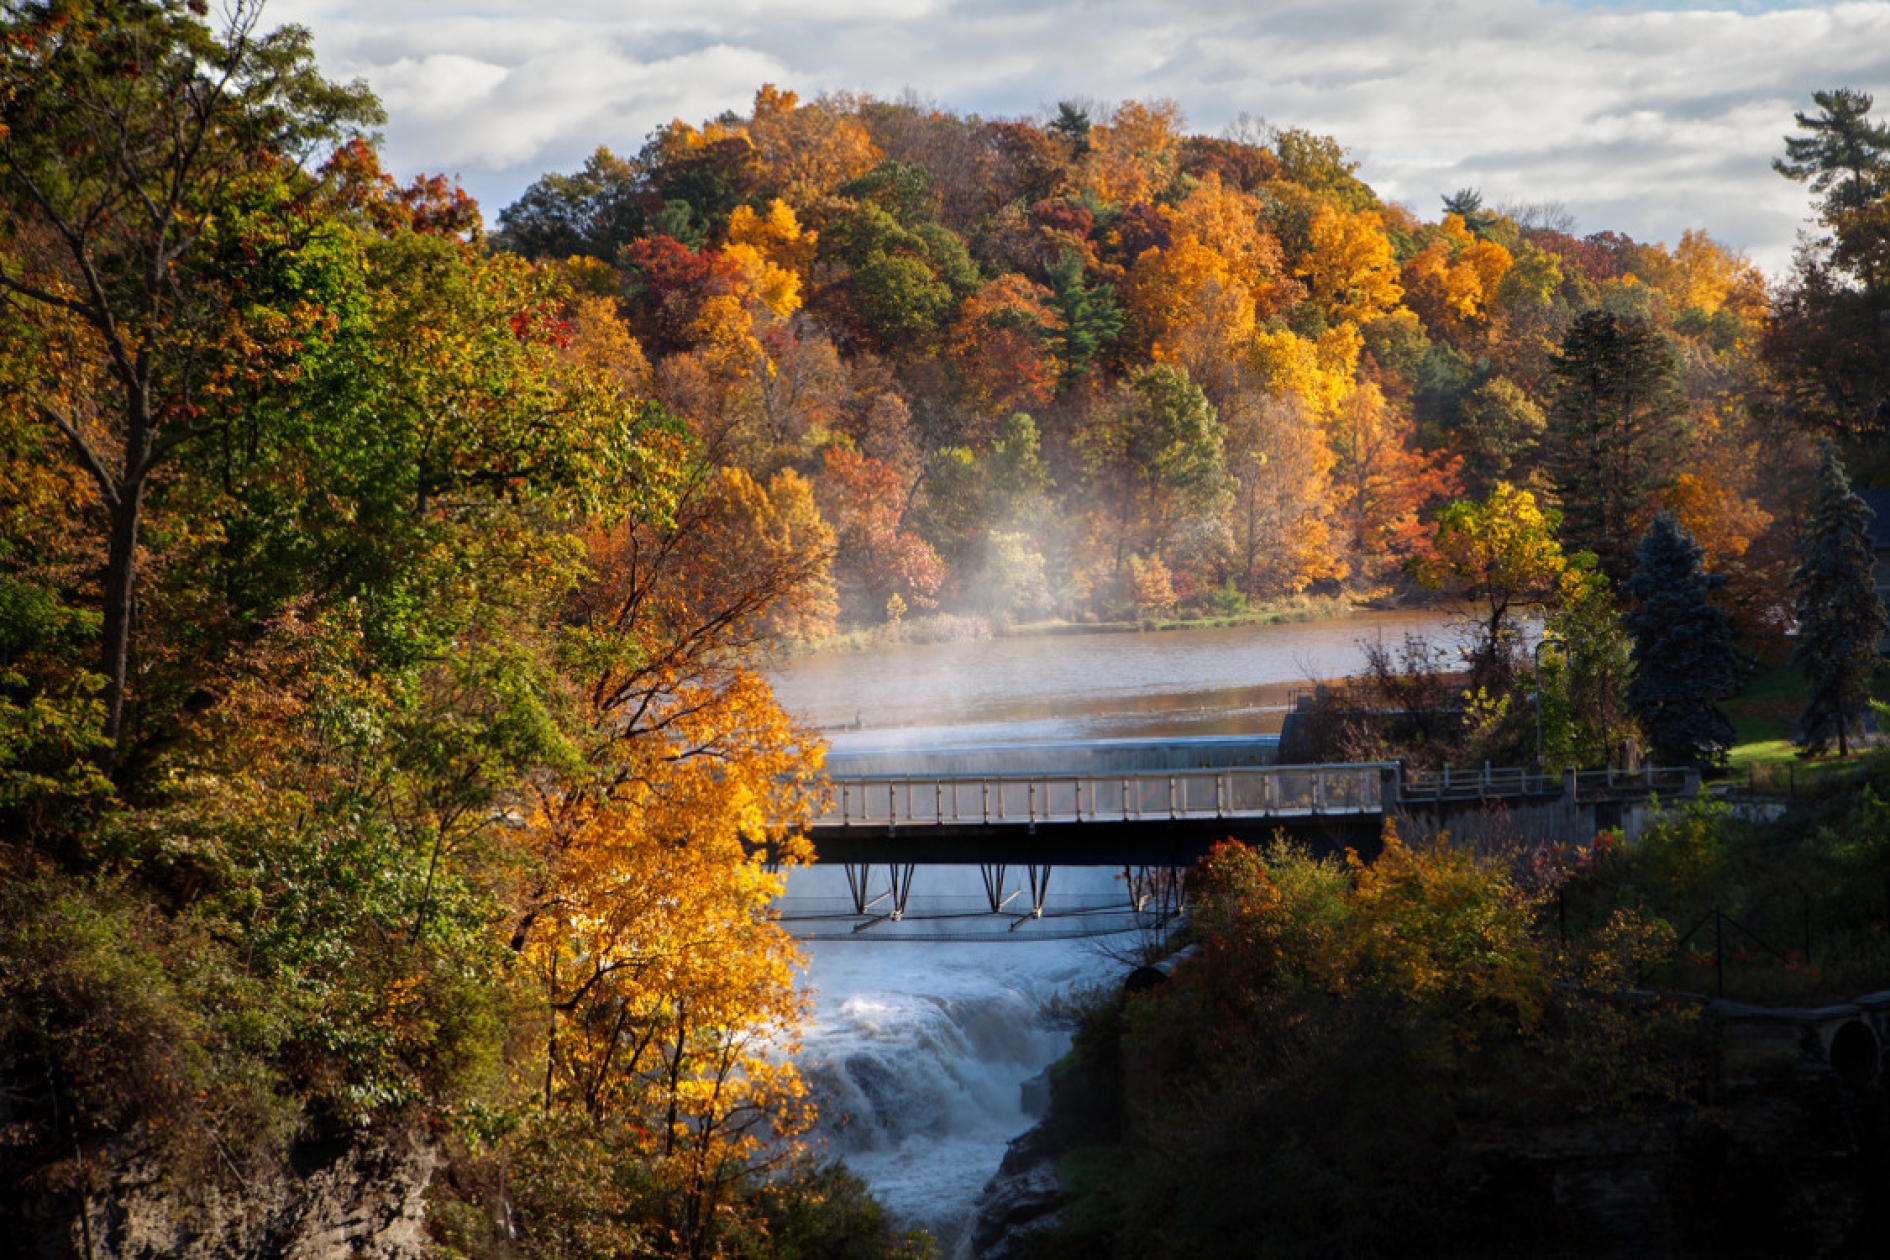 Beebe Lake and the Triphammer Foot Bridge in fall.